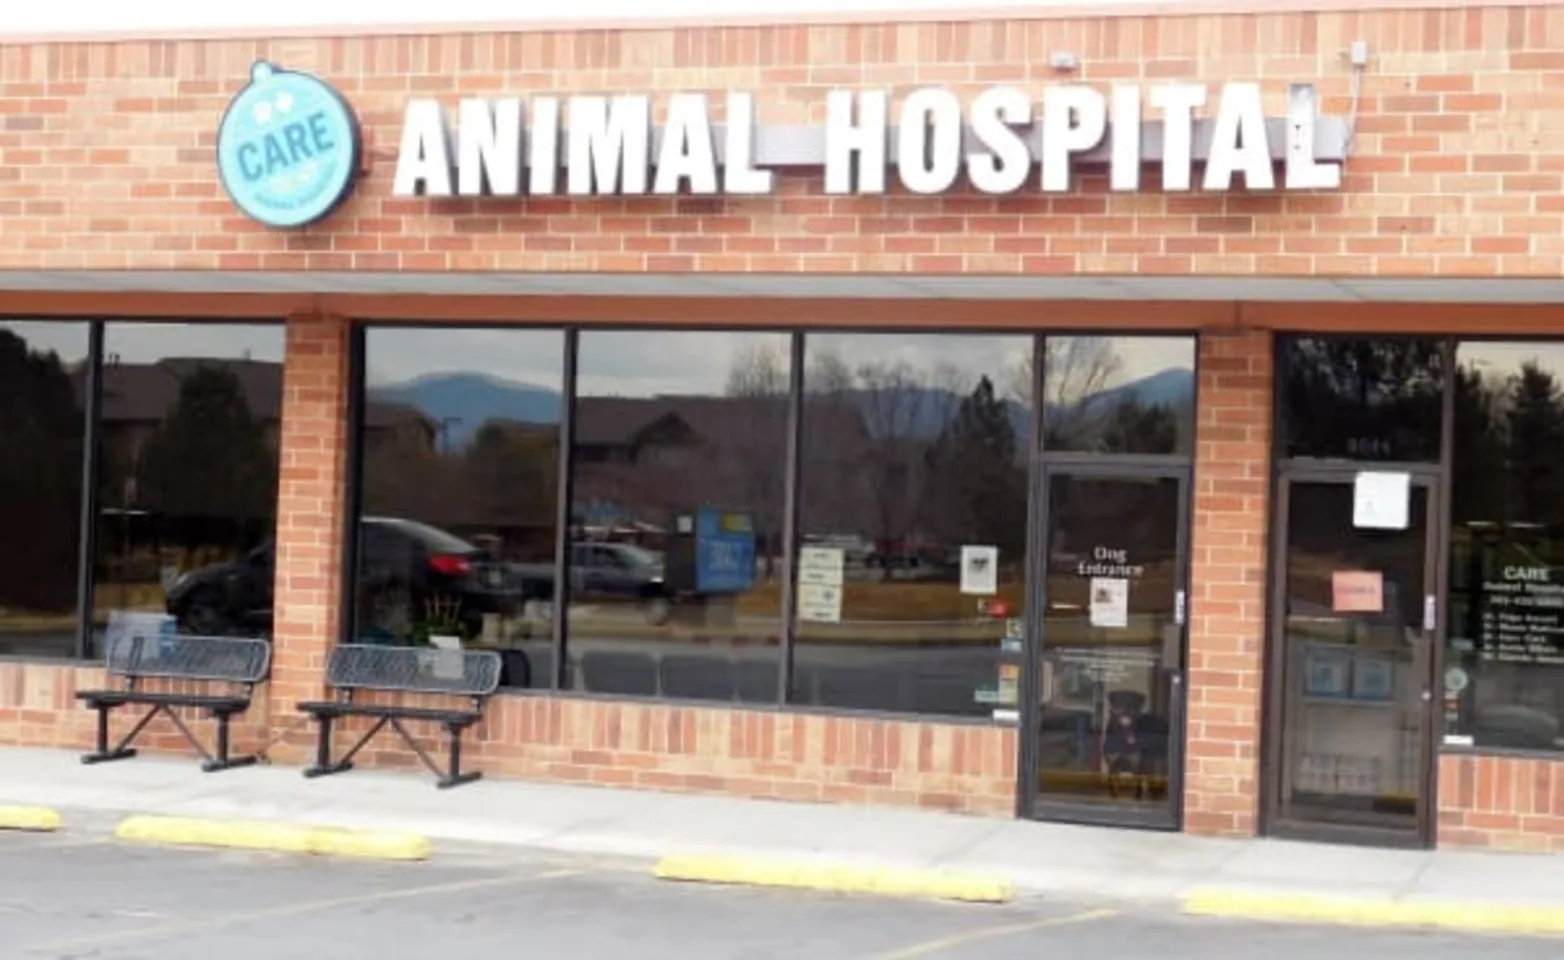 Care Animal Hospital front facade and entrance